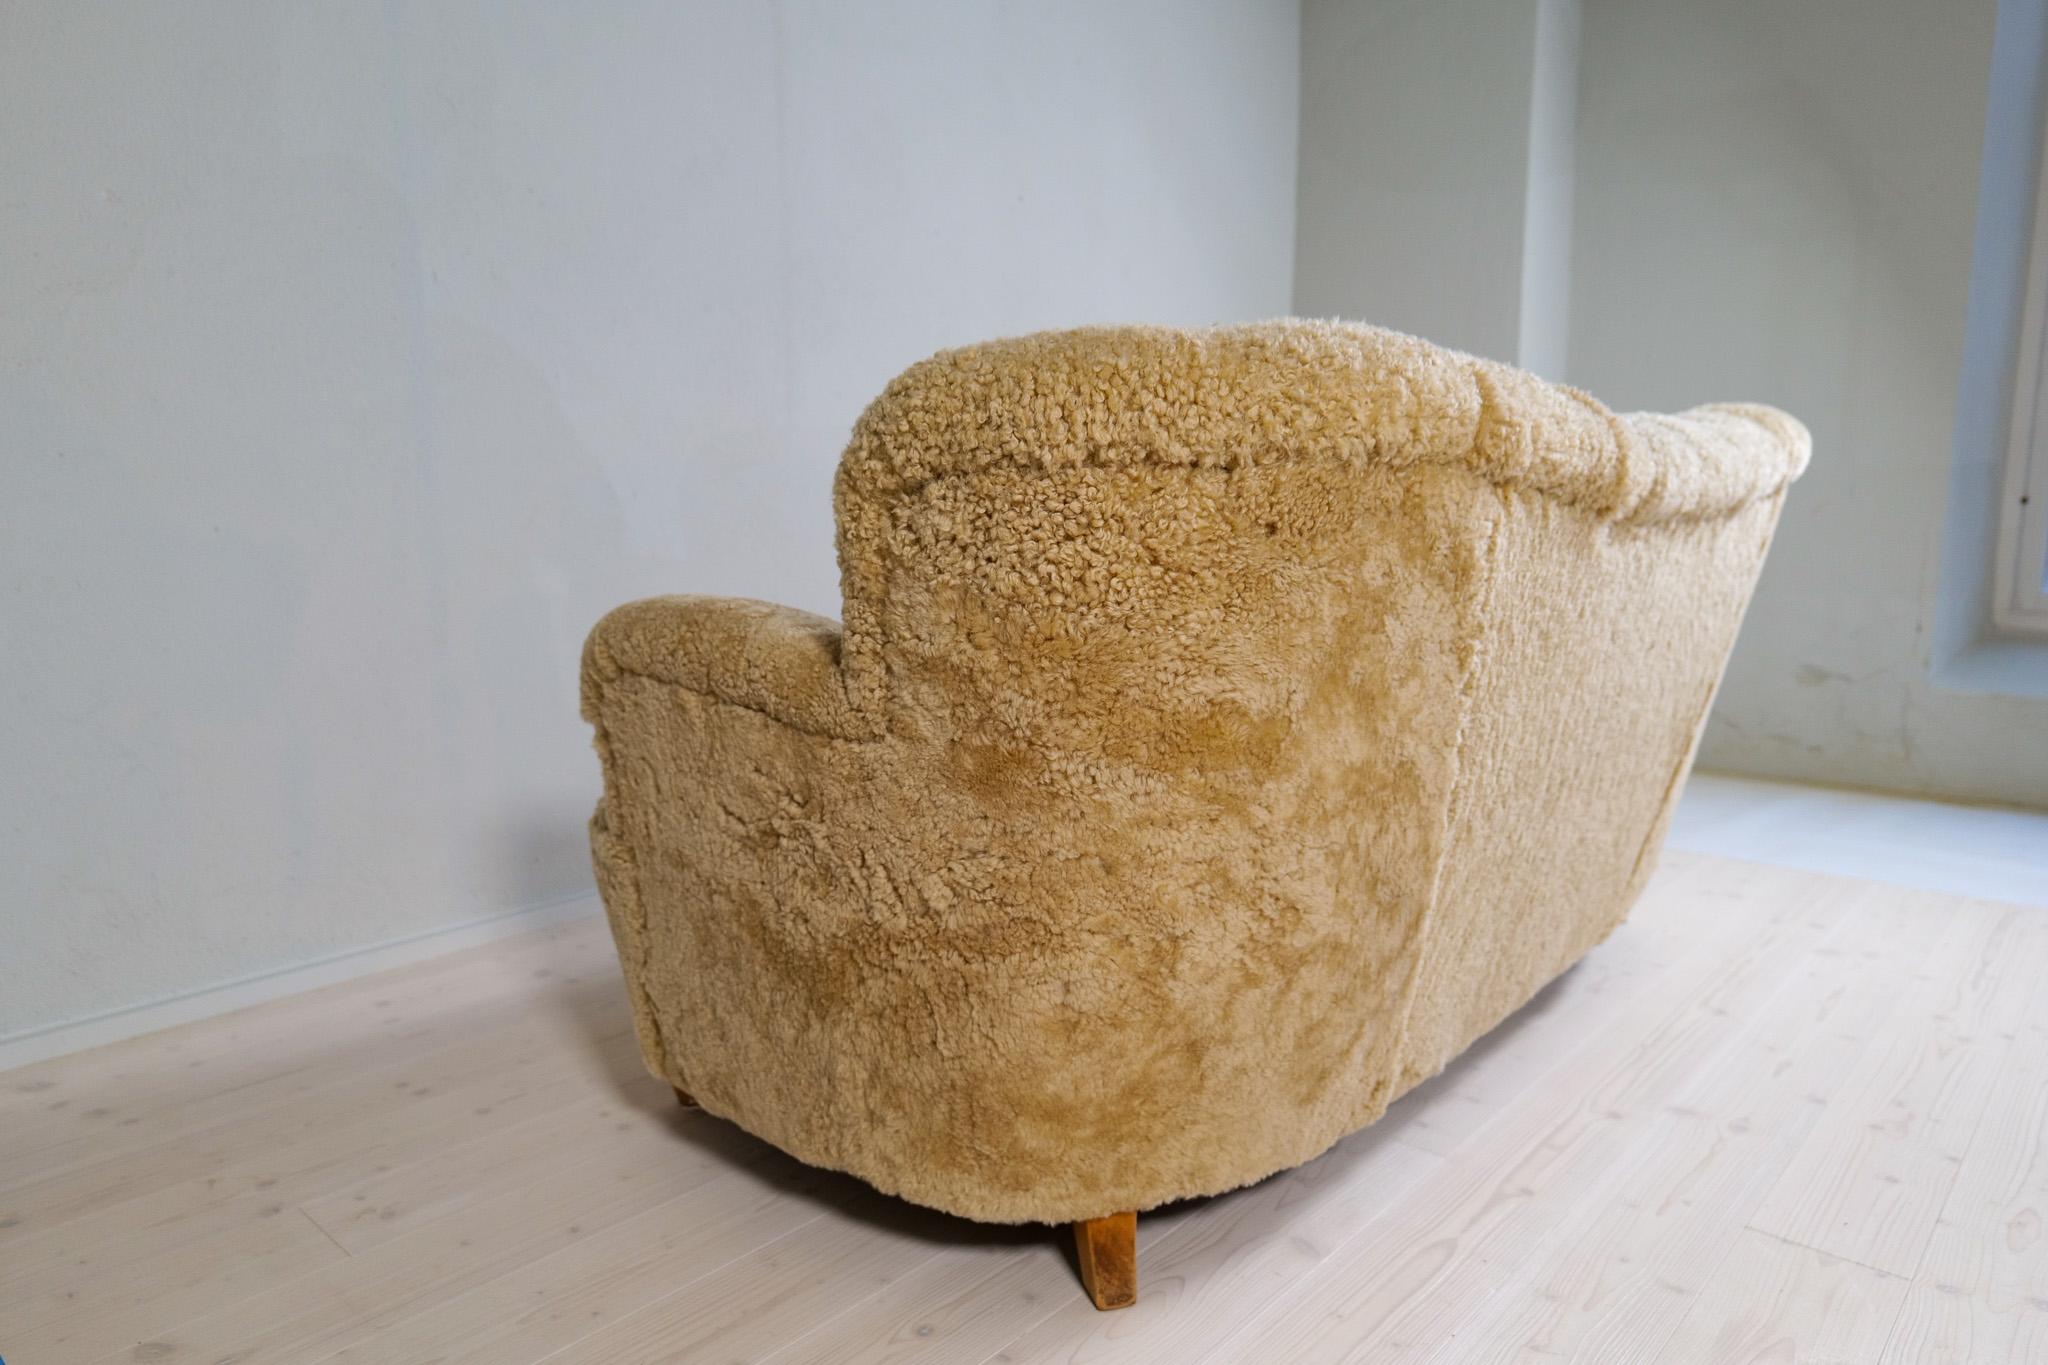 Midcentury Sculptrual Sheepskin/Shearling Sofa in Manors of Marta Blomstedt 14